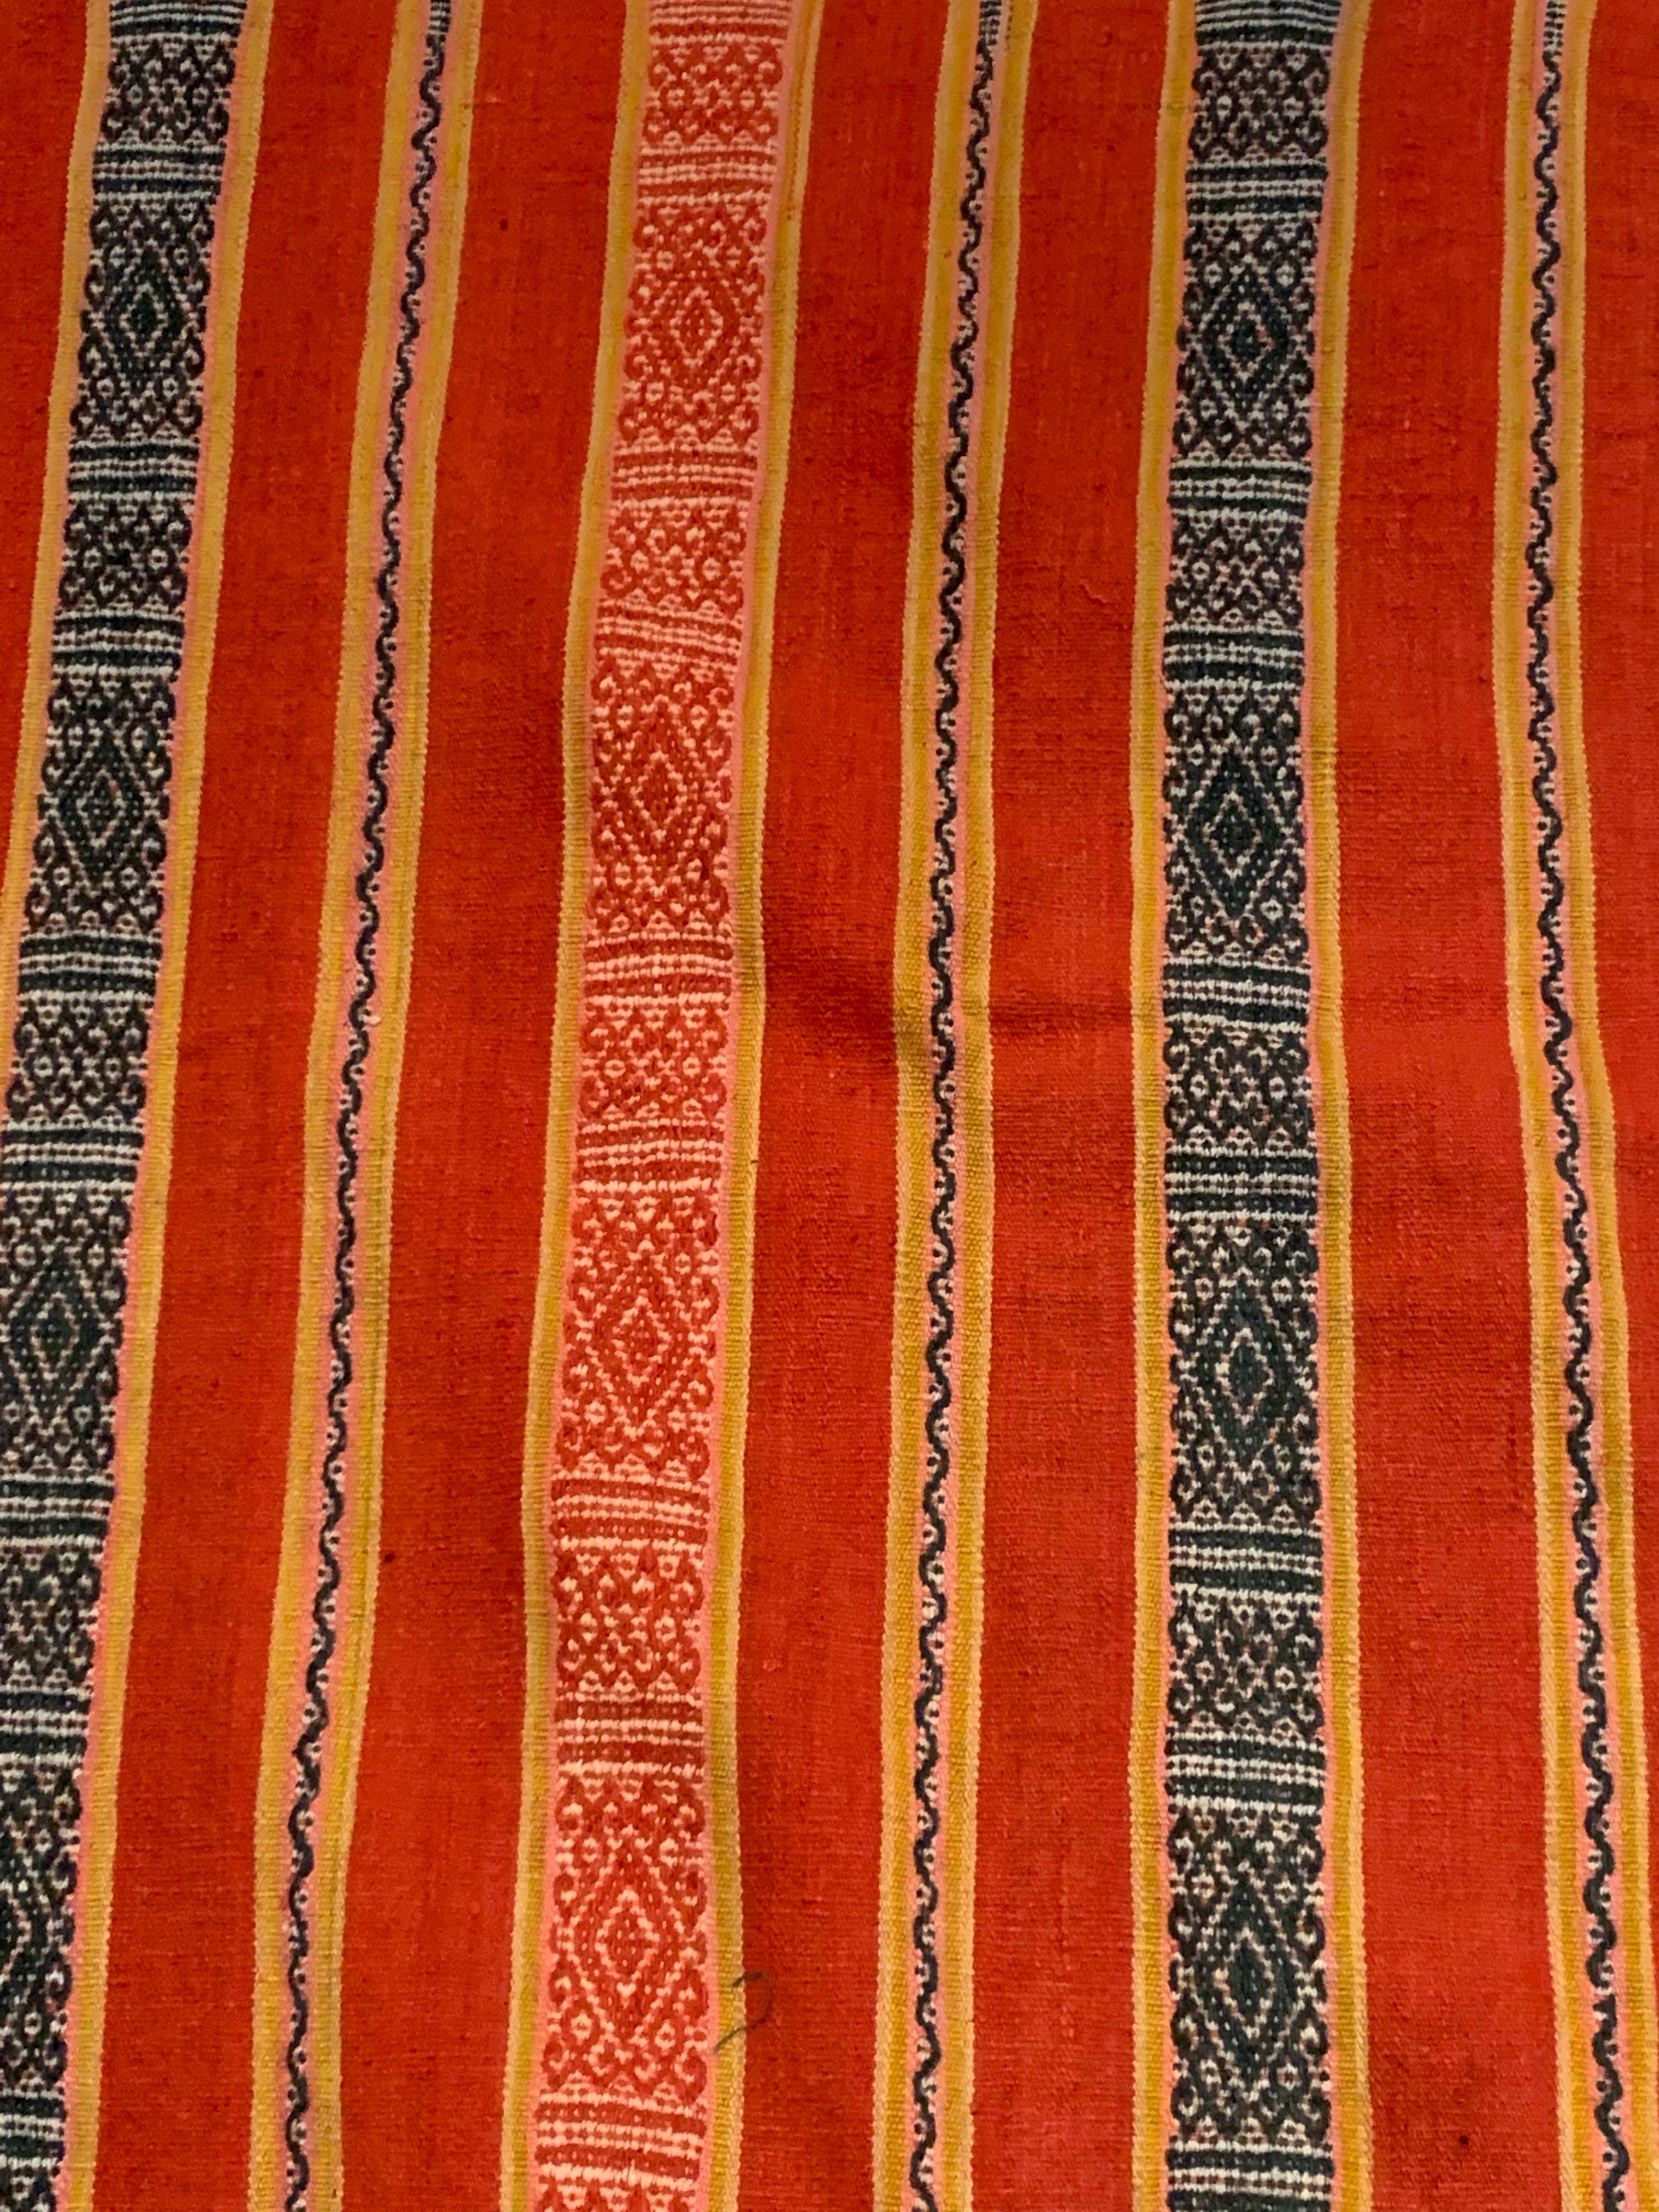 Other Ikat Textile from Timor Stunning Tribal Motifs & Colors, Indonesia c. 1950 For Sale